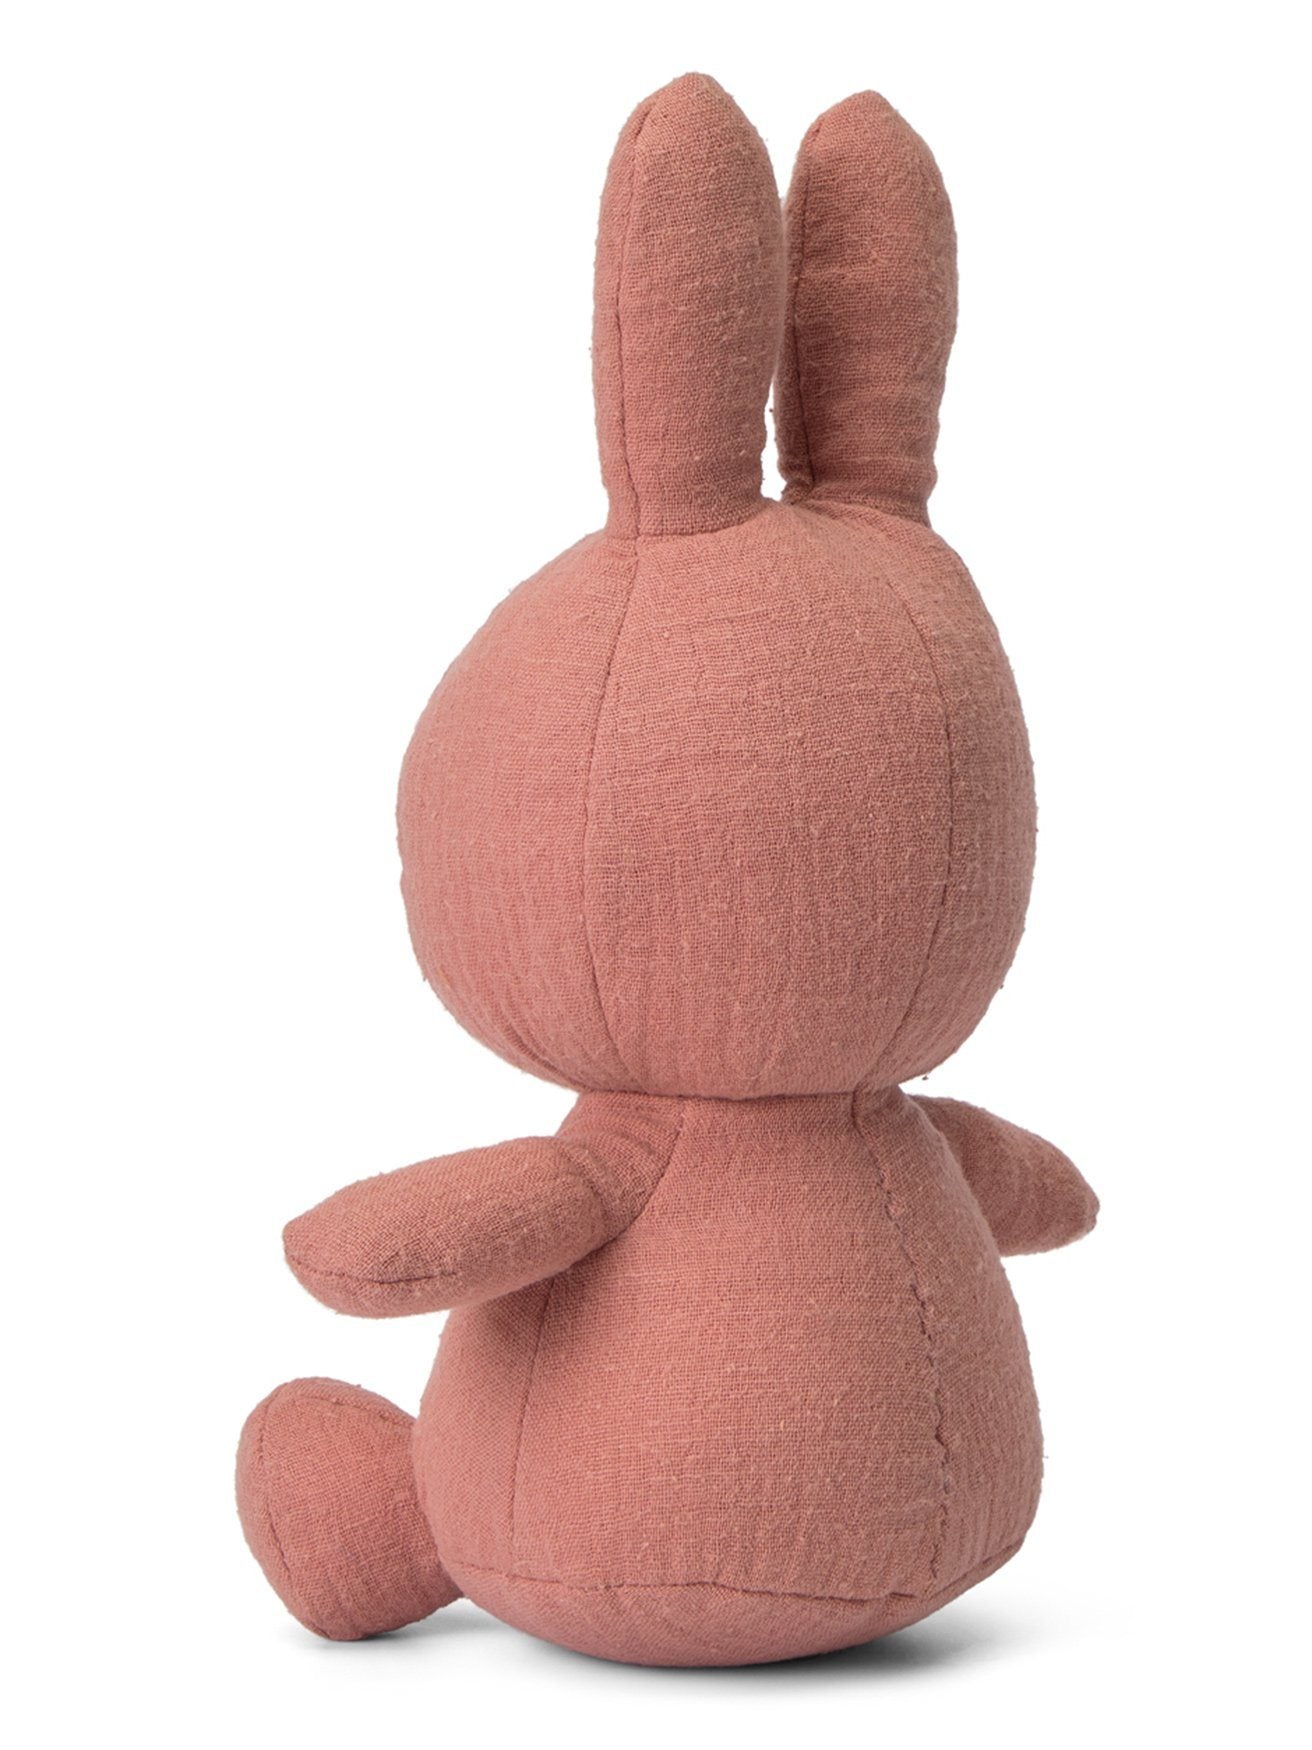 Miffy Muslin Plush Toy - Dusty Pink - Toy - Miffy